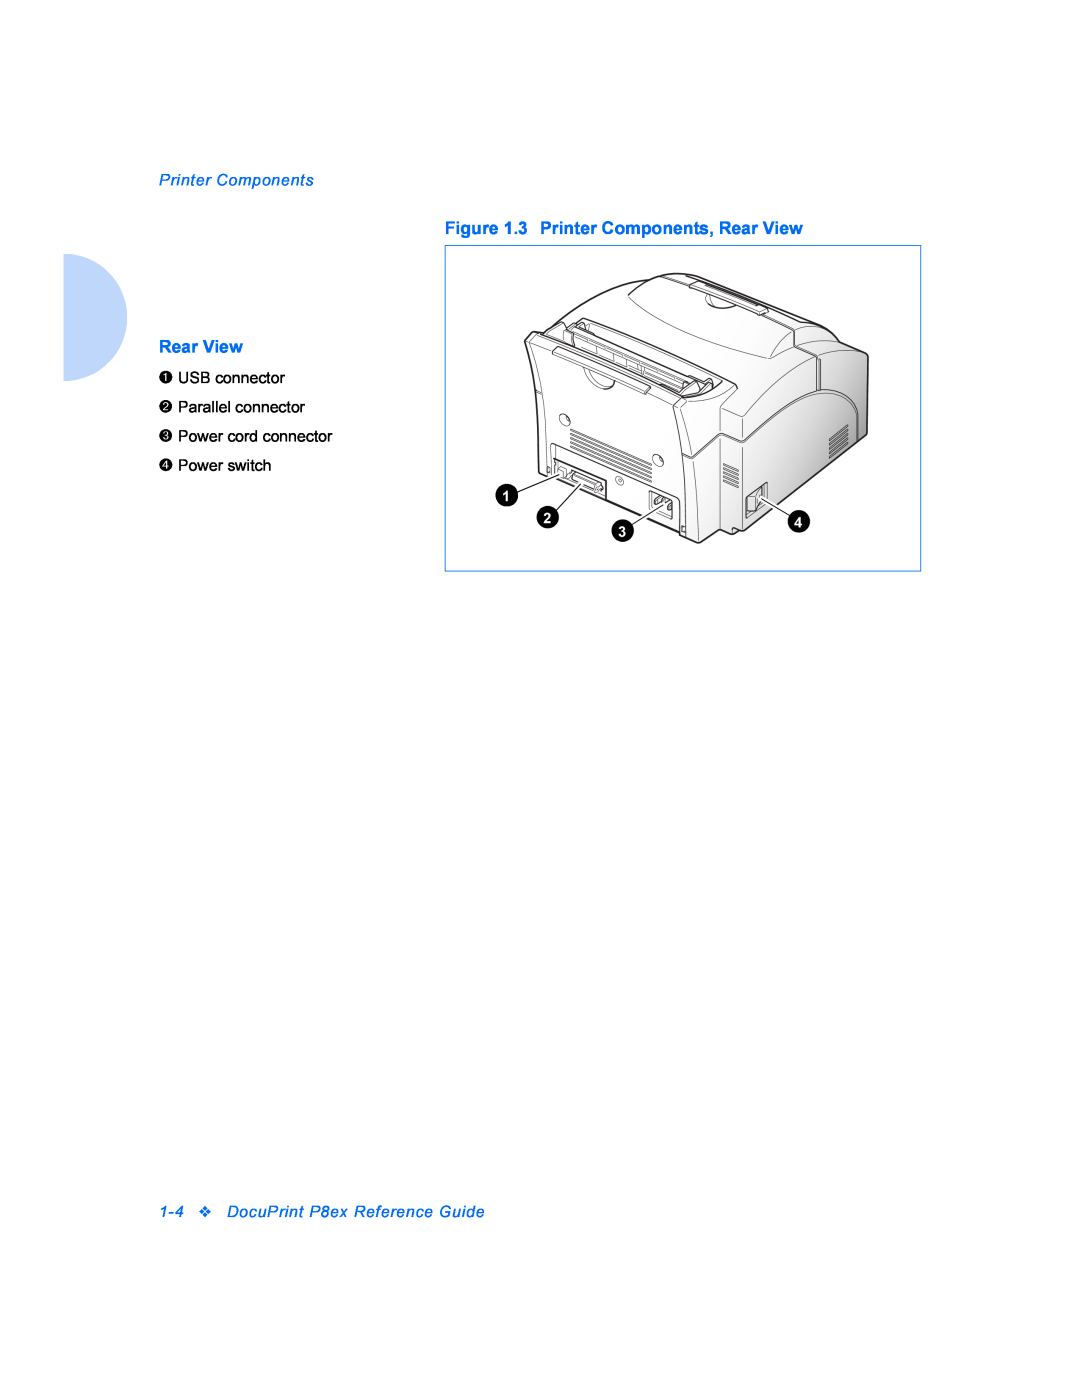 Xerox P8EX manual 3 Printer Components, Rear View, 1-4DocuPrint P8ex Reference Guide 